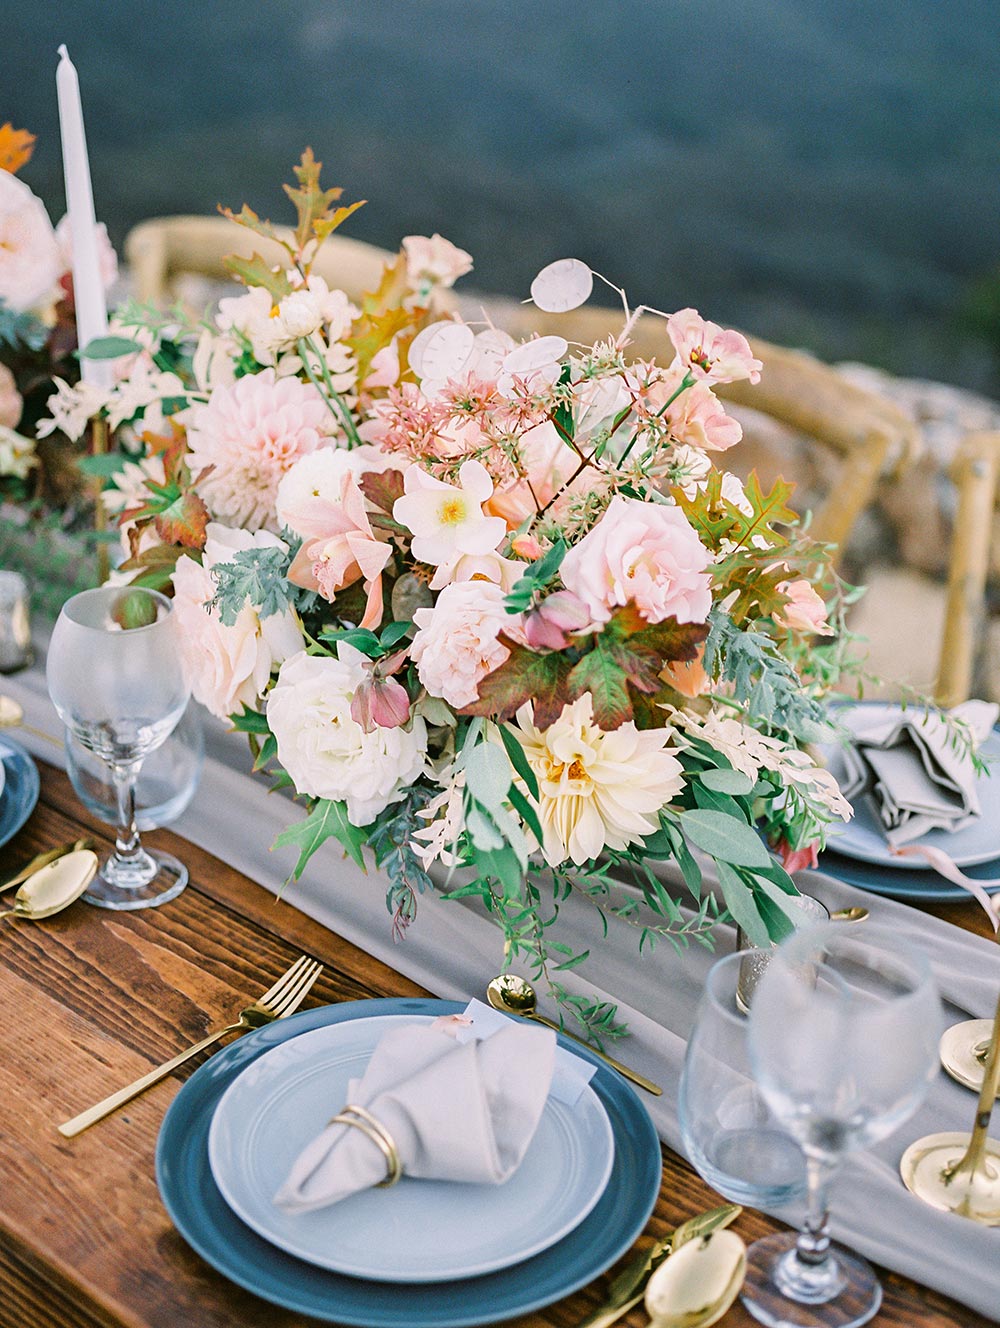 A Floral Designer Who Forages in the Hills of Malibu - The New